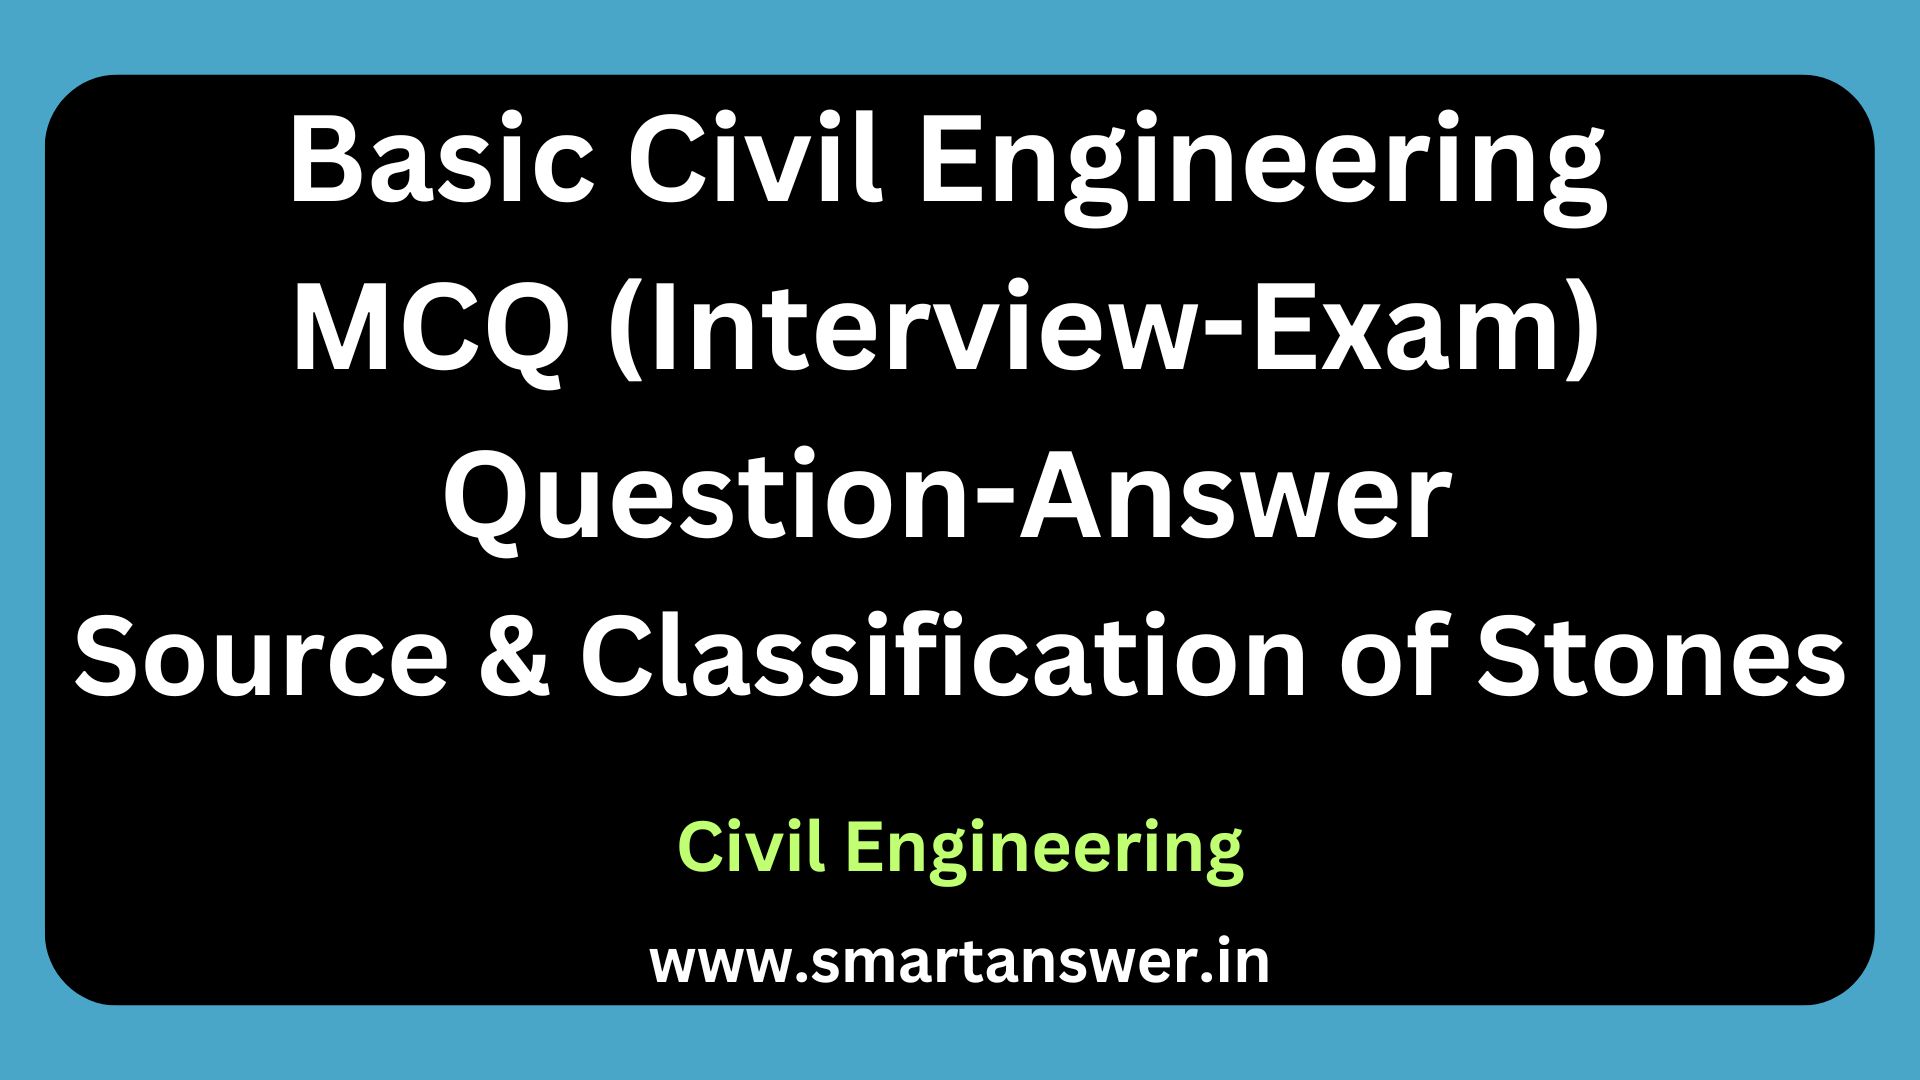 Basic Civil Engineering MCQ (Interview-Exam) Question-Answer - Source and Classification of Stones